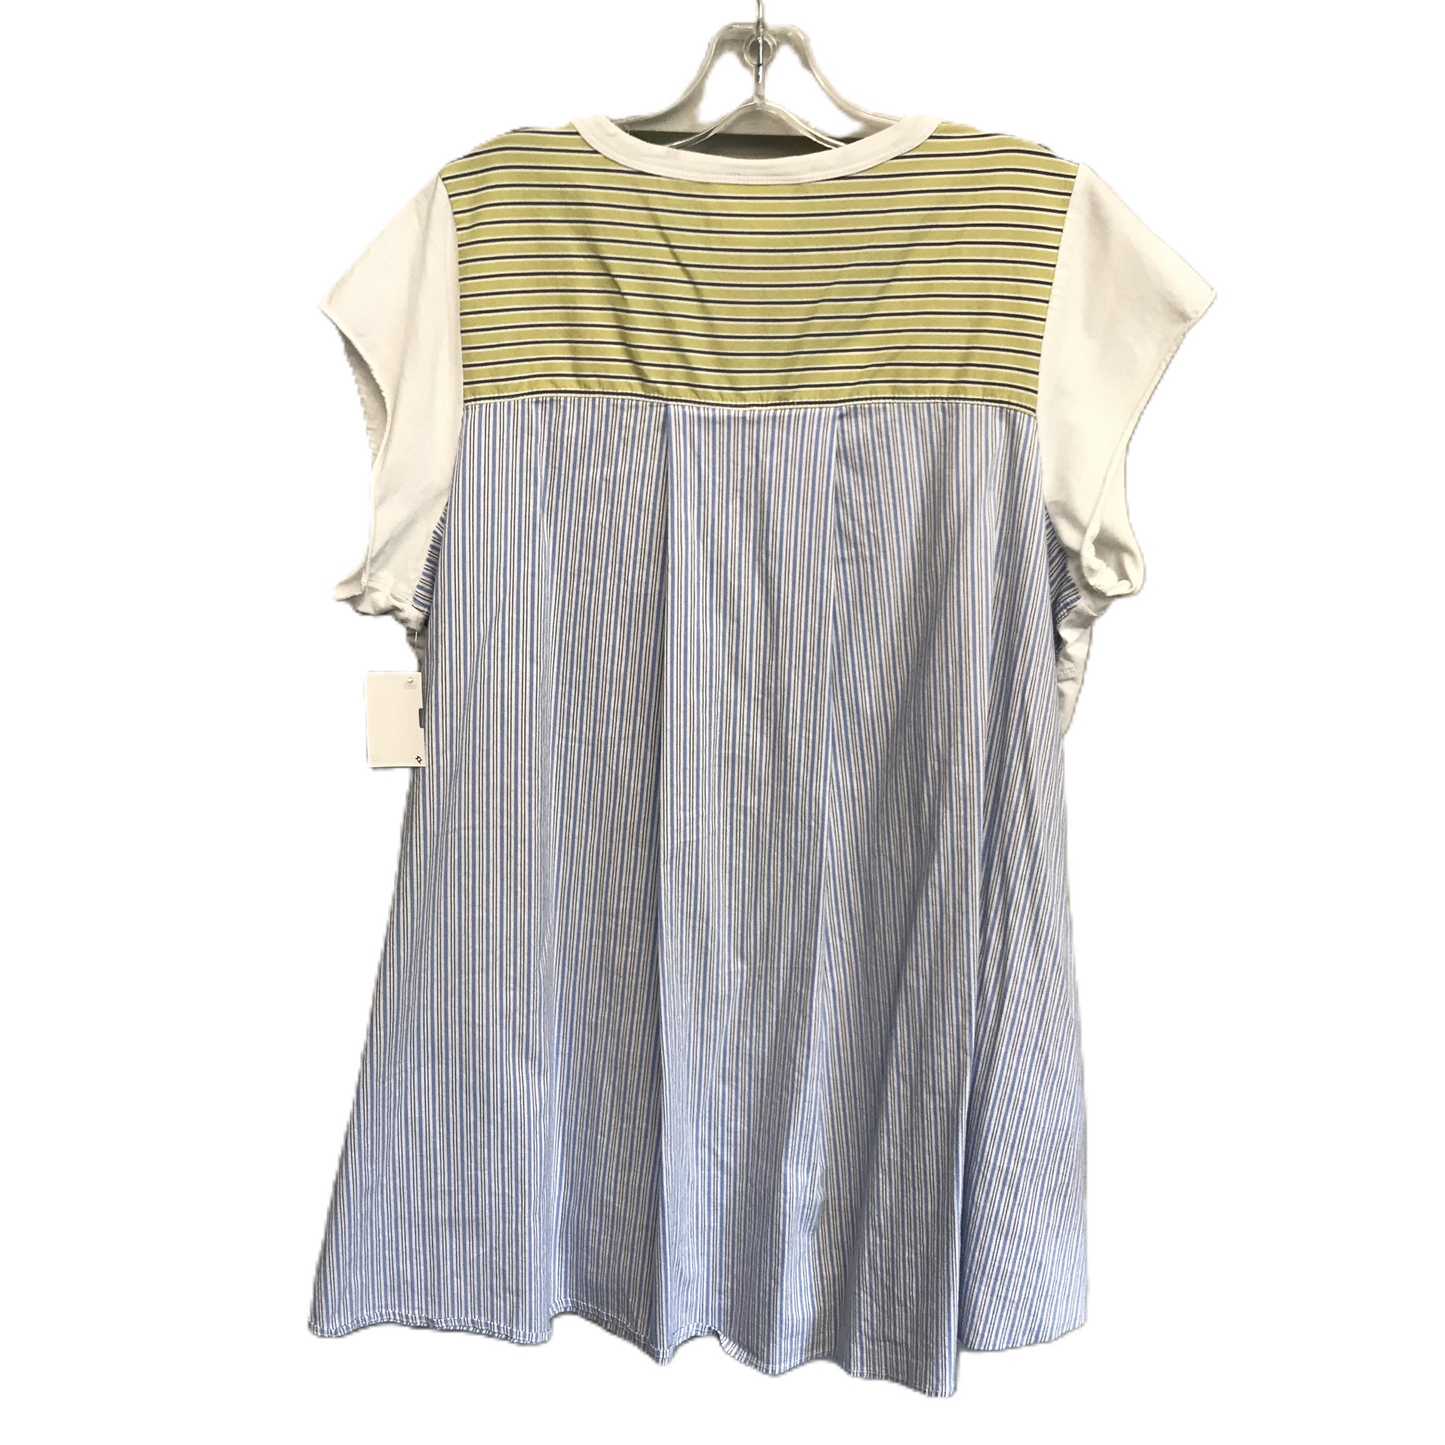 Green & White Top Short Sleeve By Maeve, Size: M